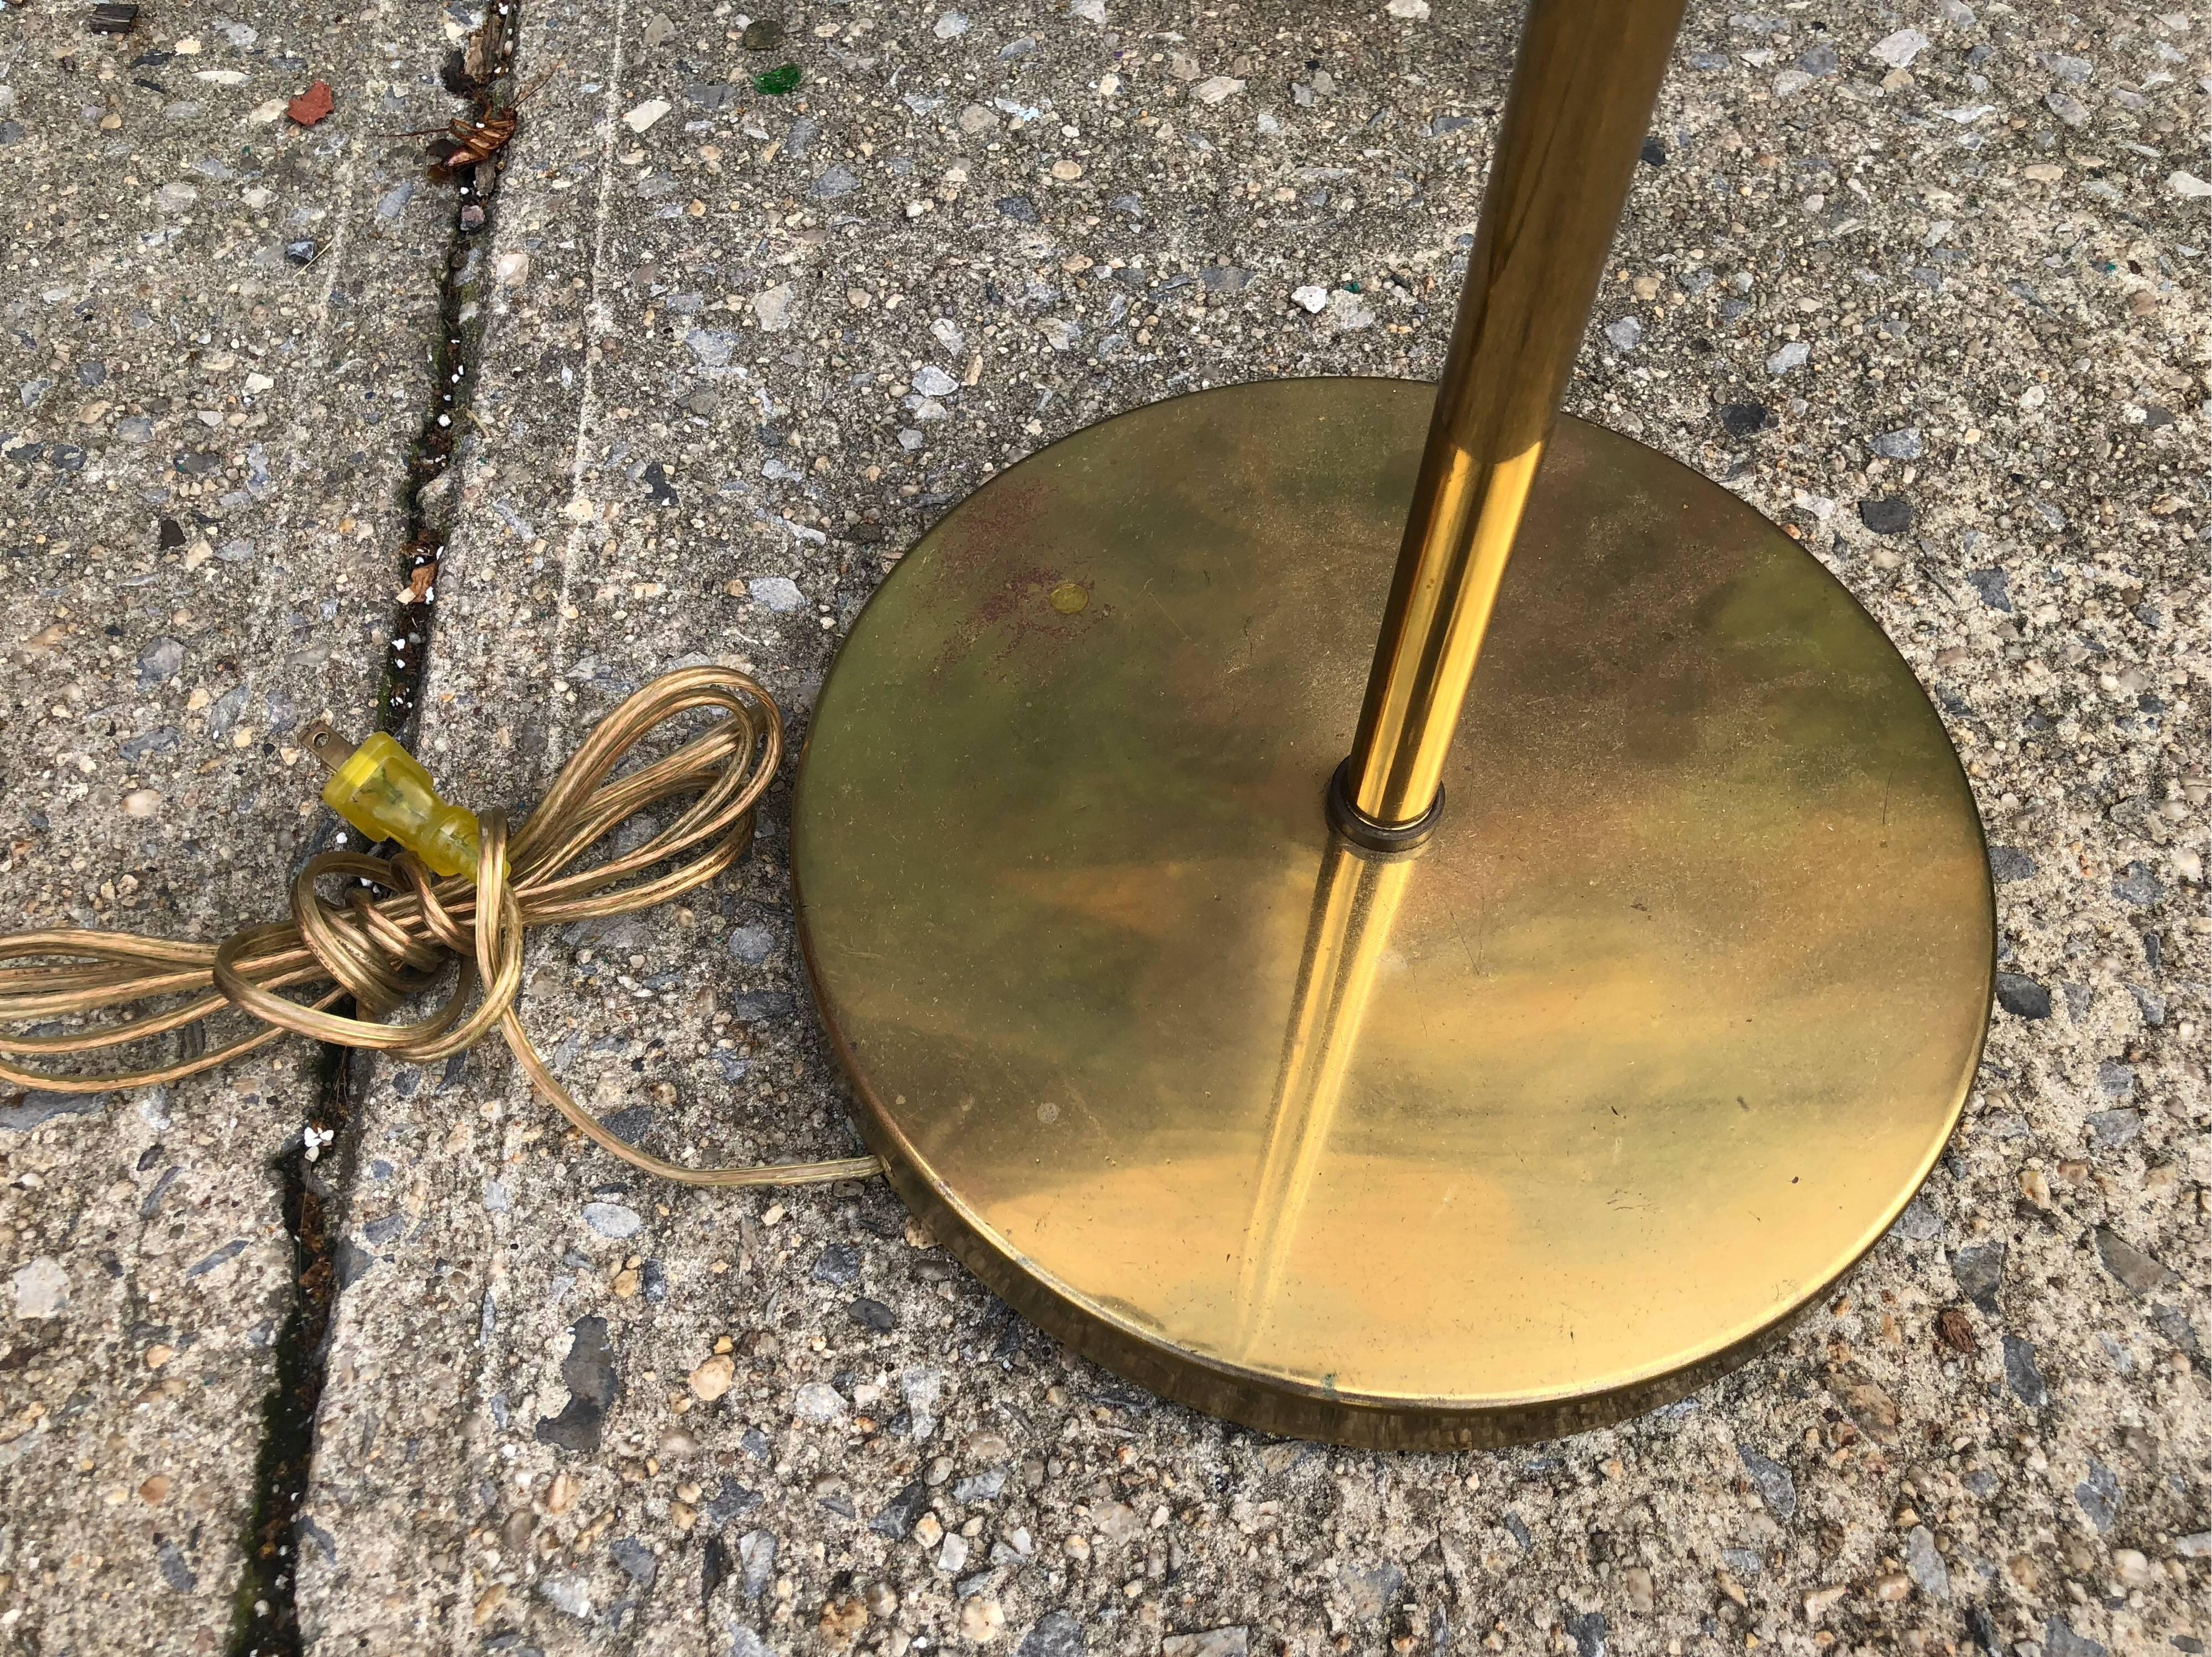 Gorgeous Koch and Lowy brass floor lamp. Incredible subtle patina. In original condition with no major wear. Functions perfectly. All heads pivot and swivel smoothly.